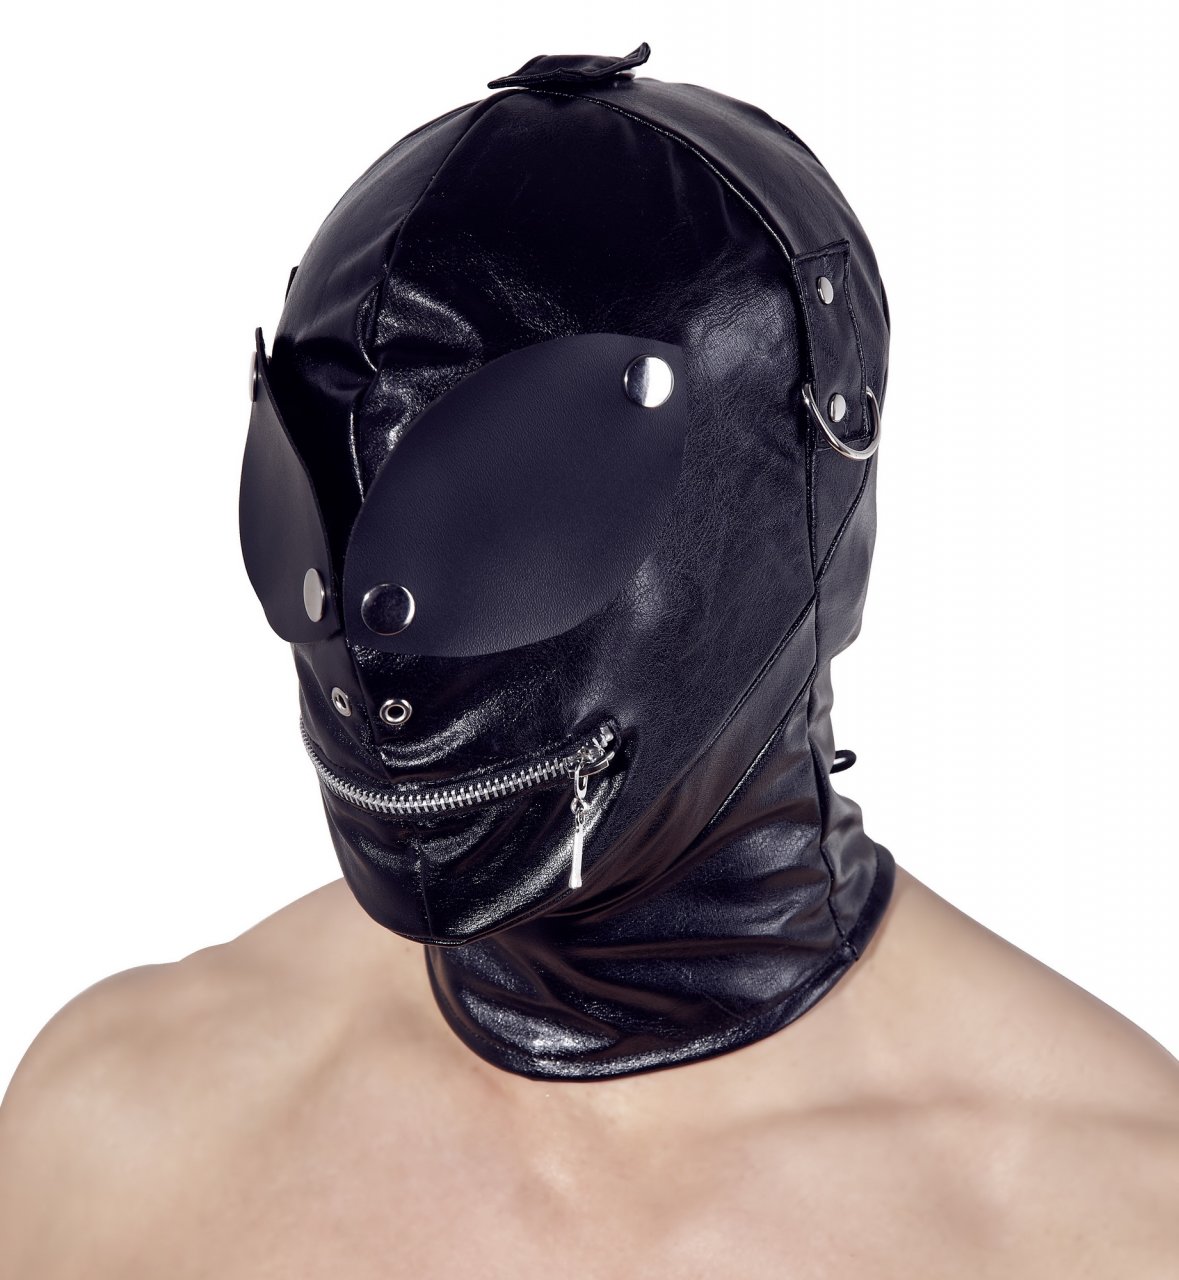 Mask with eye patches and zipper